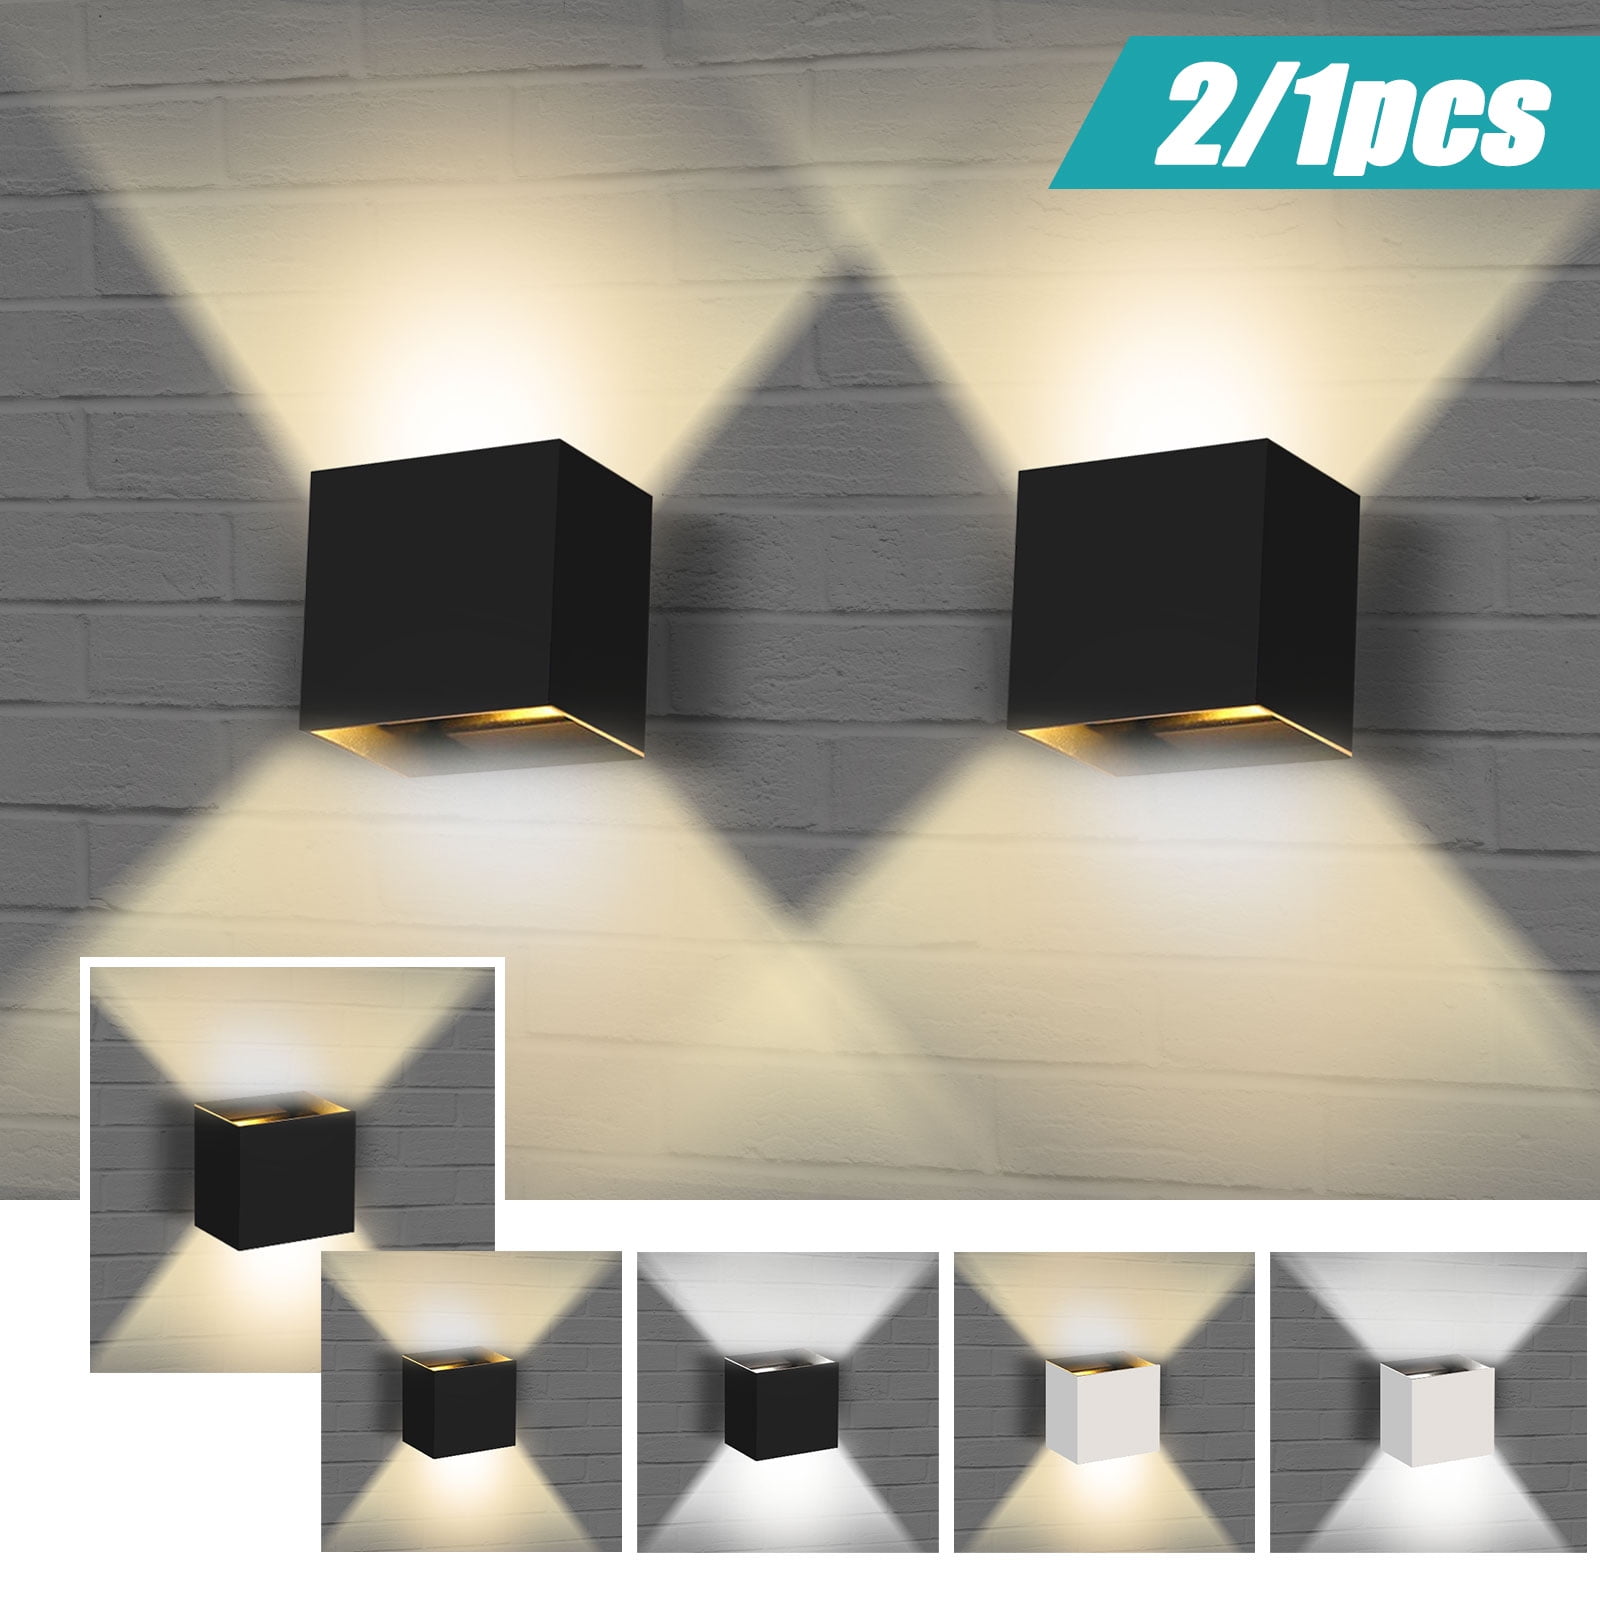 Details about   Modern LED Wall Light Up Down Lamp Sconce Spot Lighting Home Bedroom Fixture 